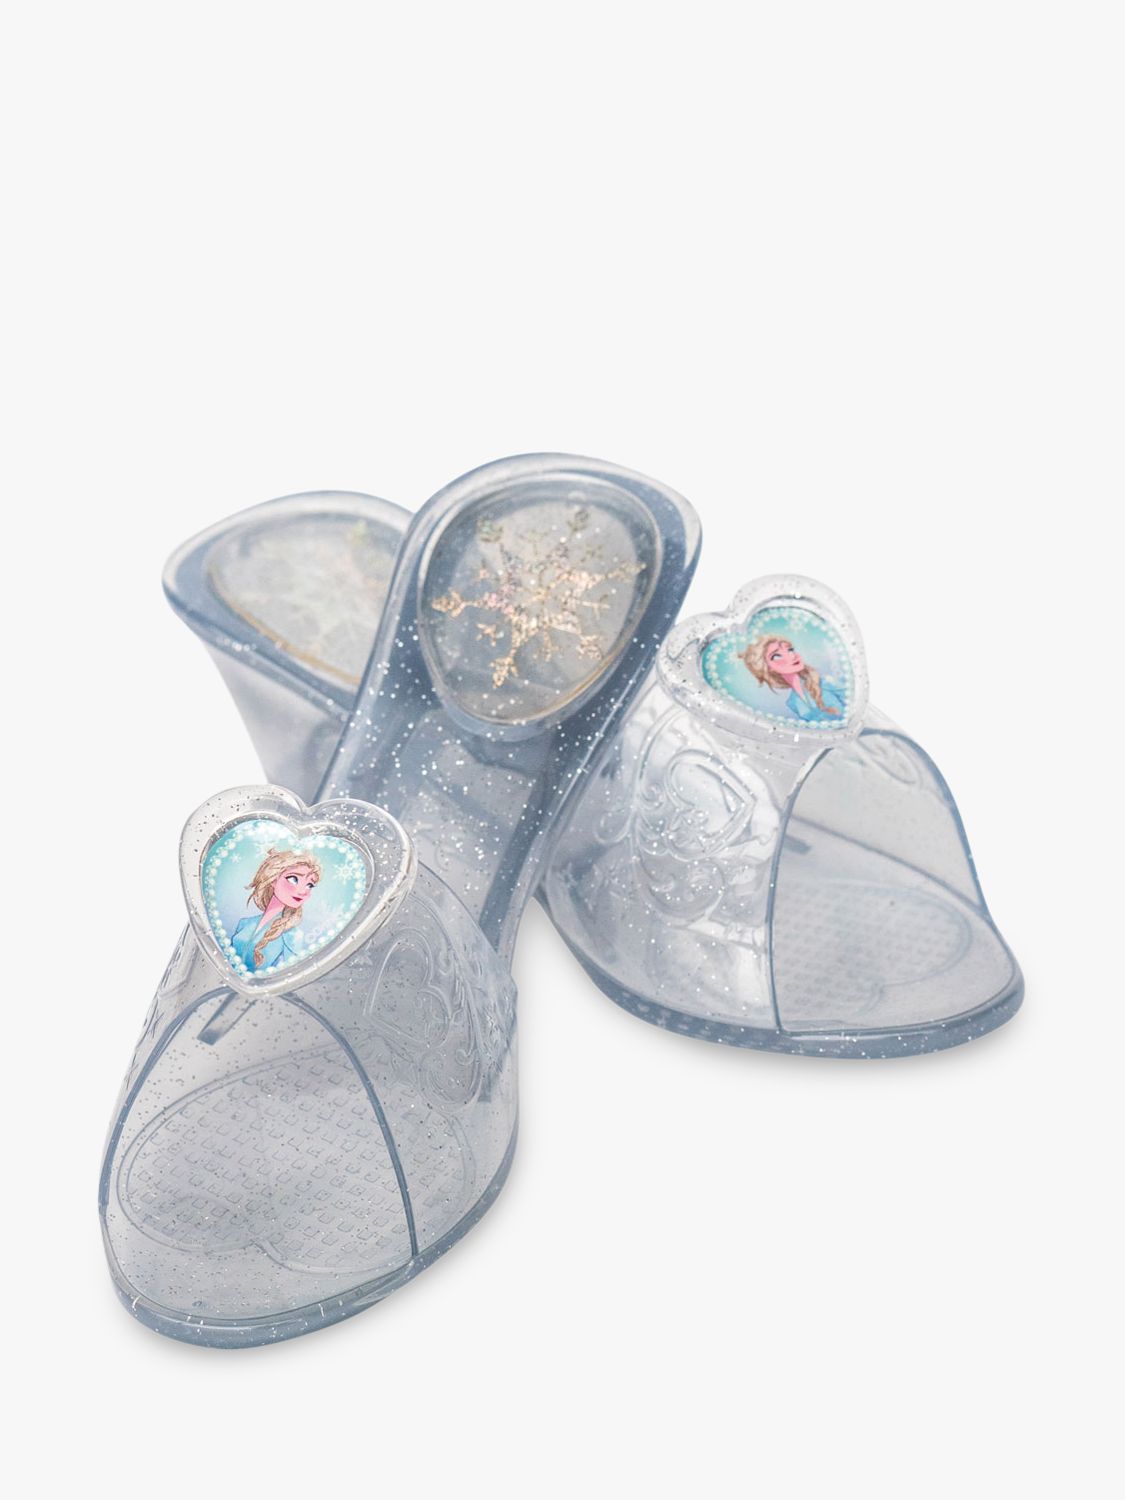 john lewis jelly shoes